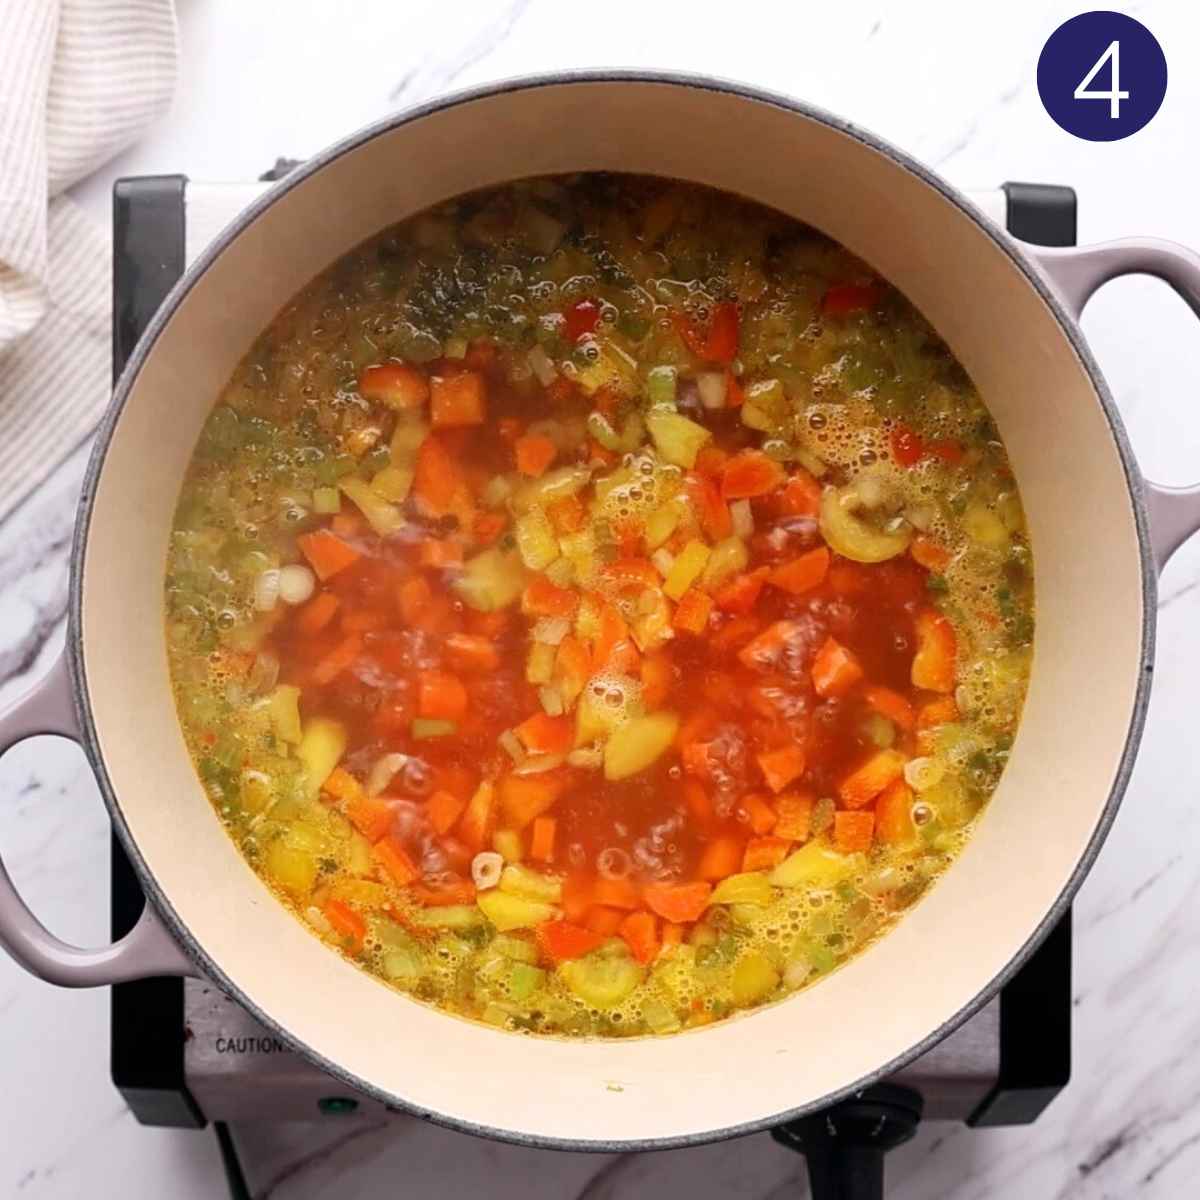 Cooking vegetables with broth in a cast iron pot.